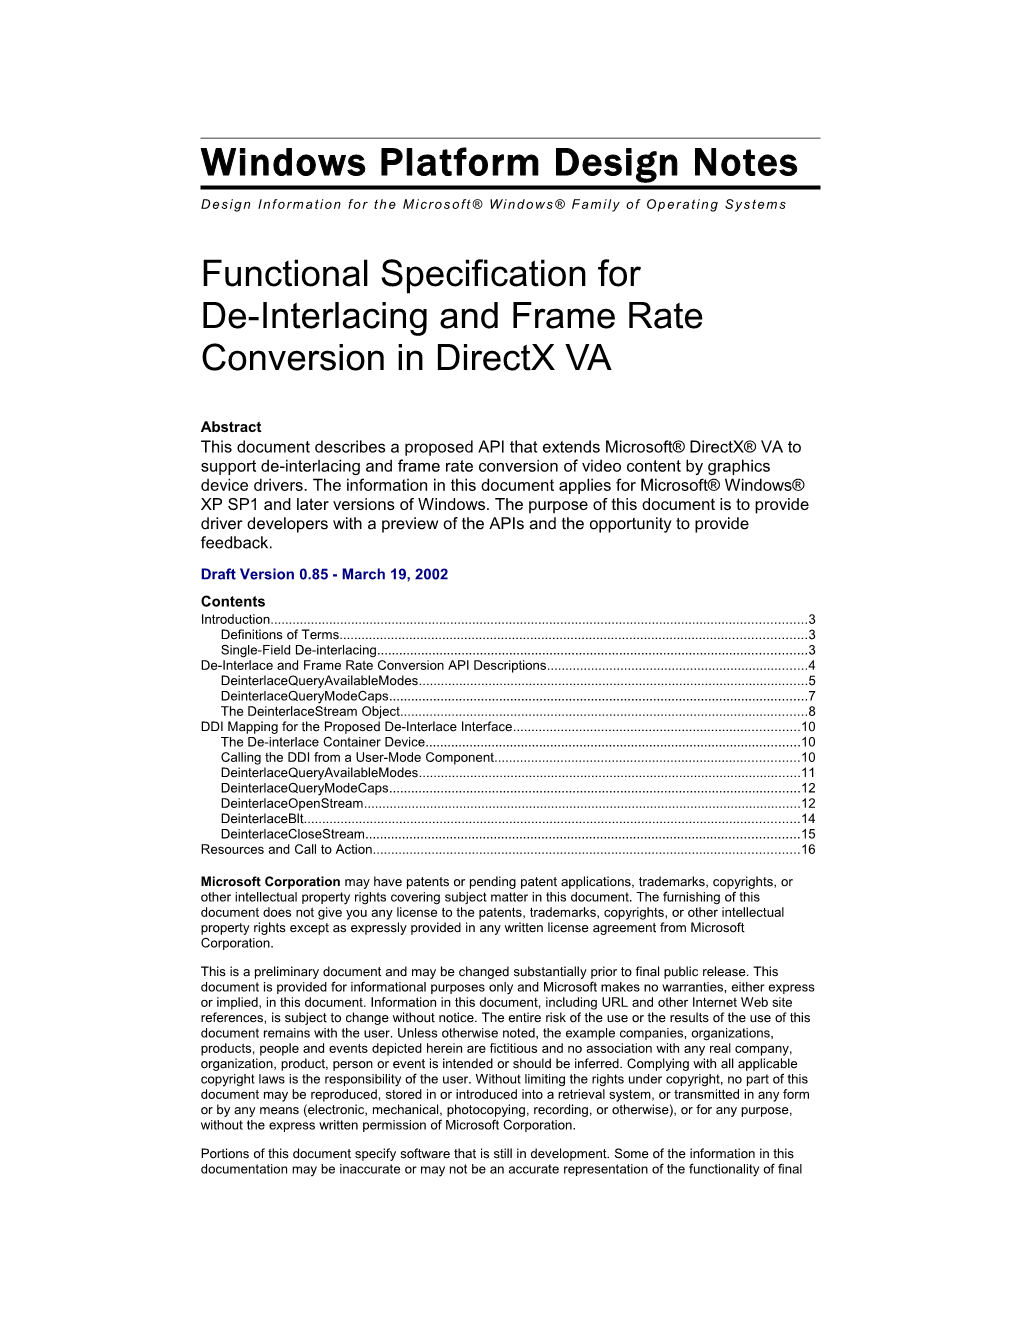 Functional Specification for De Interlacing and Frame Rate Conversion in Directx VA